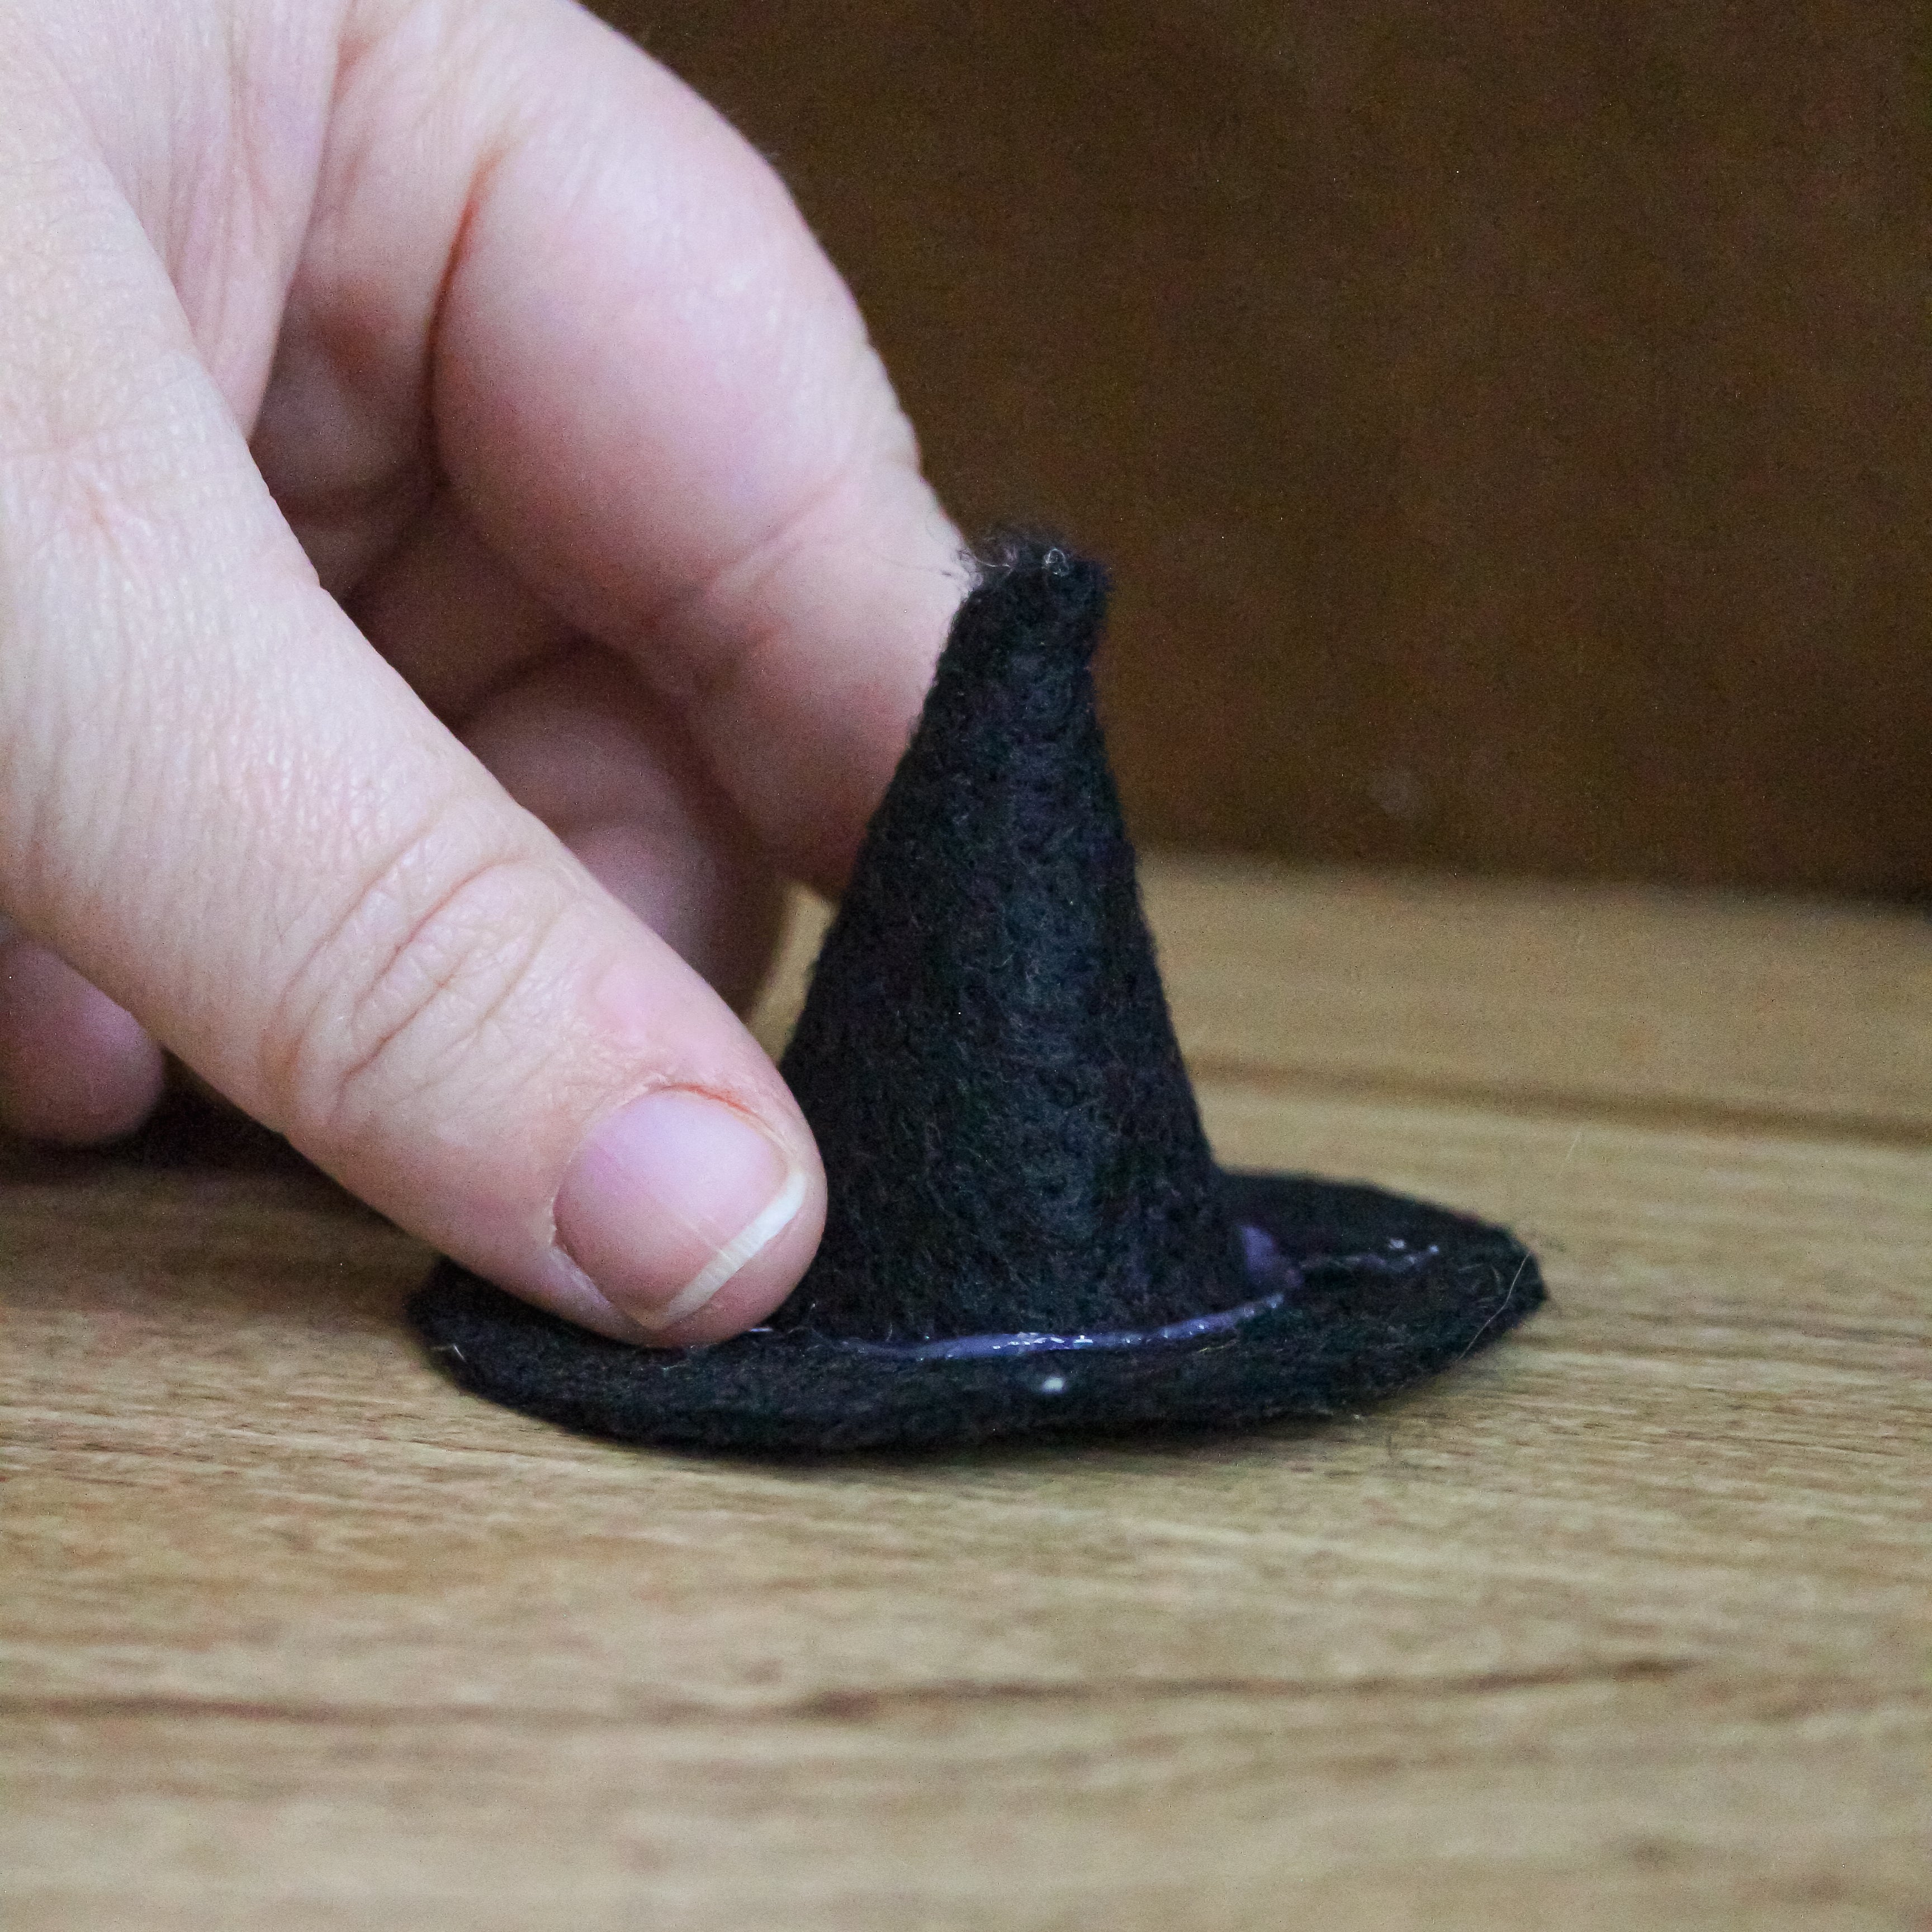 A witch hat is being formed through glueing felt.